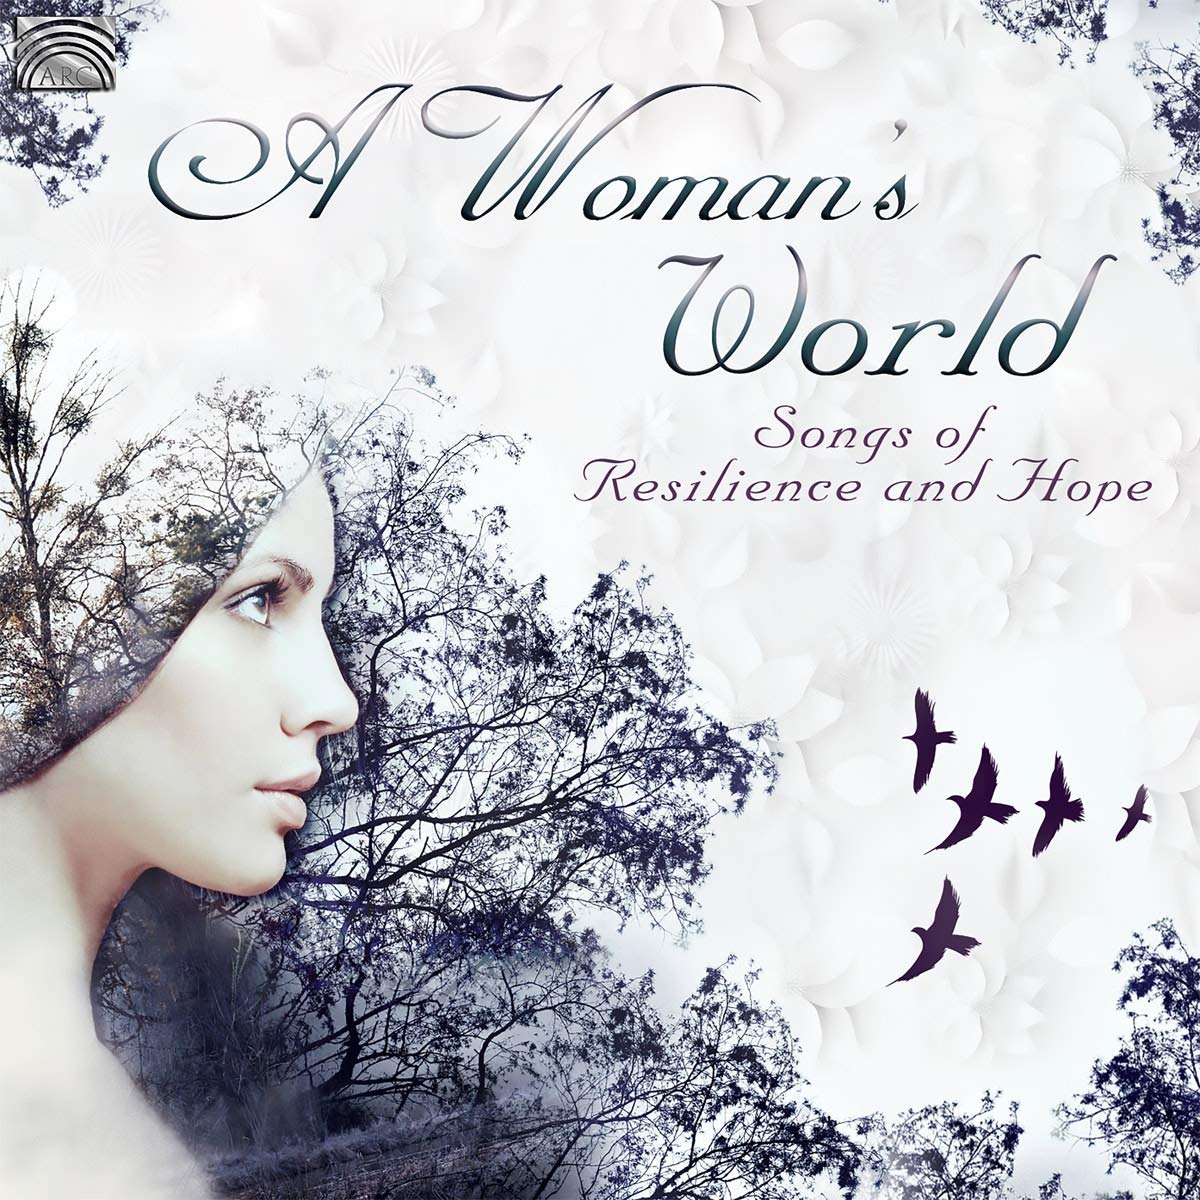 A Woman’s World – Songs of Resilience and Hope